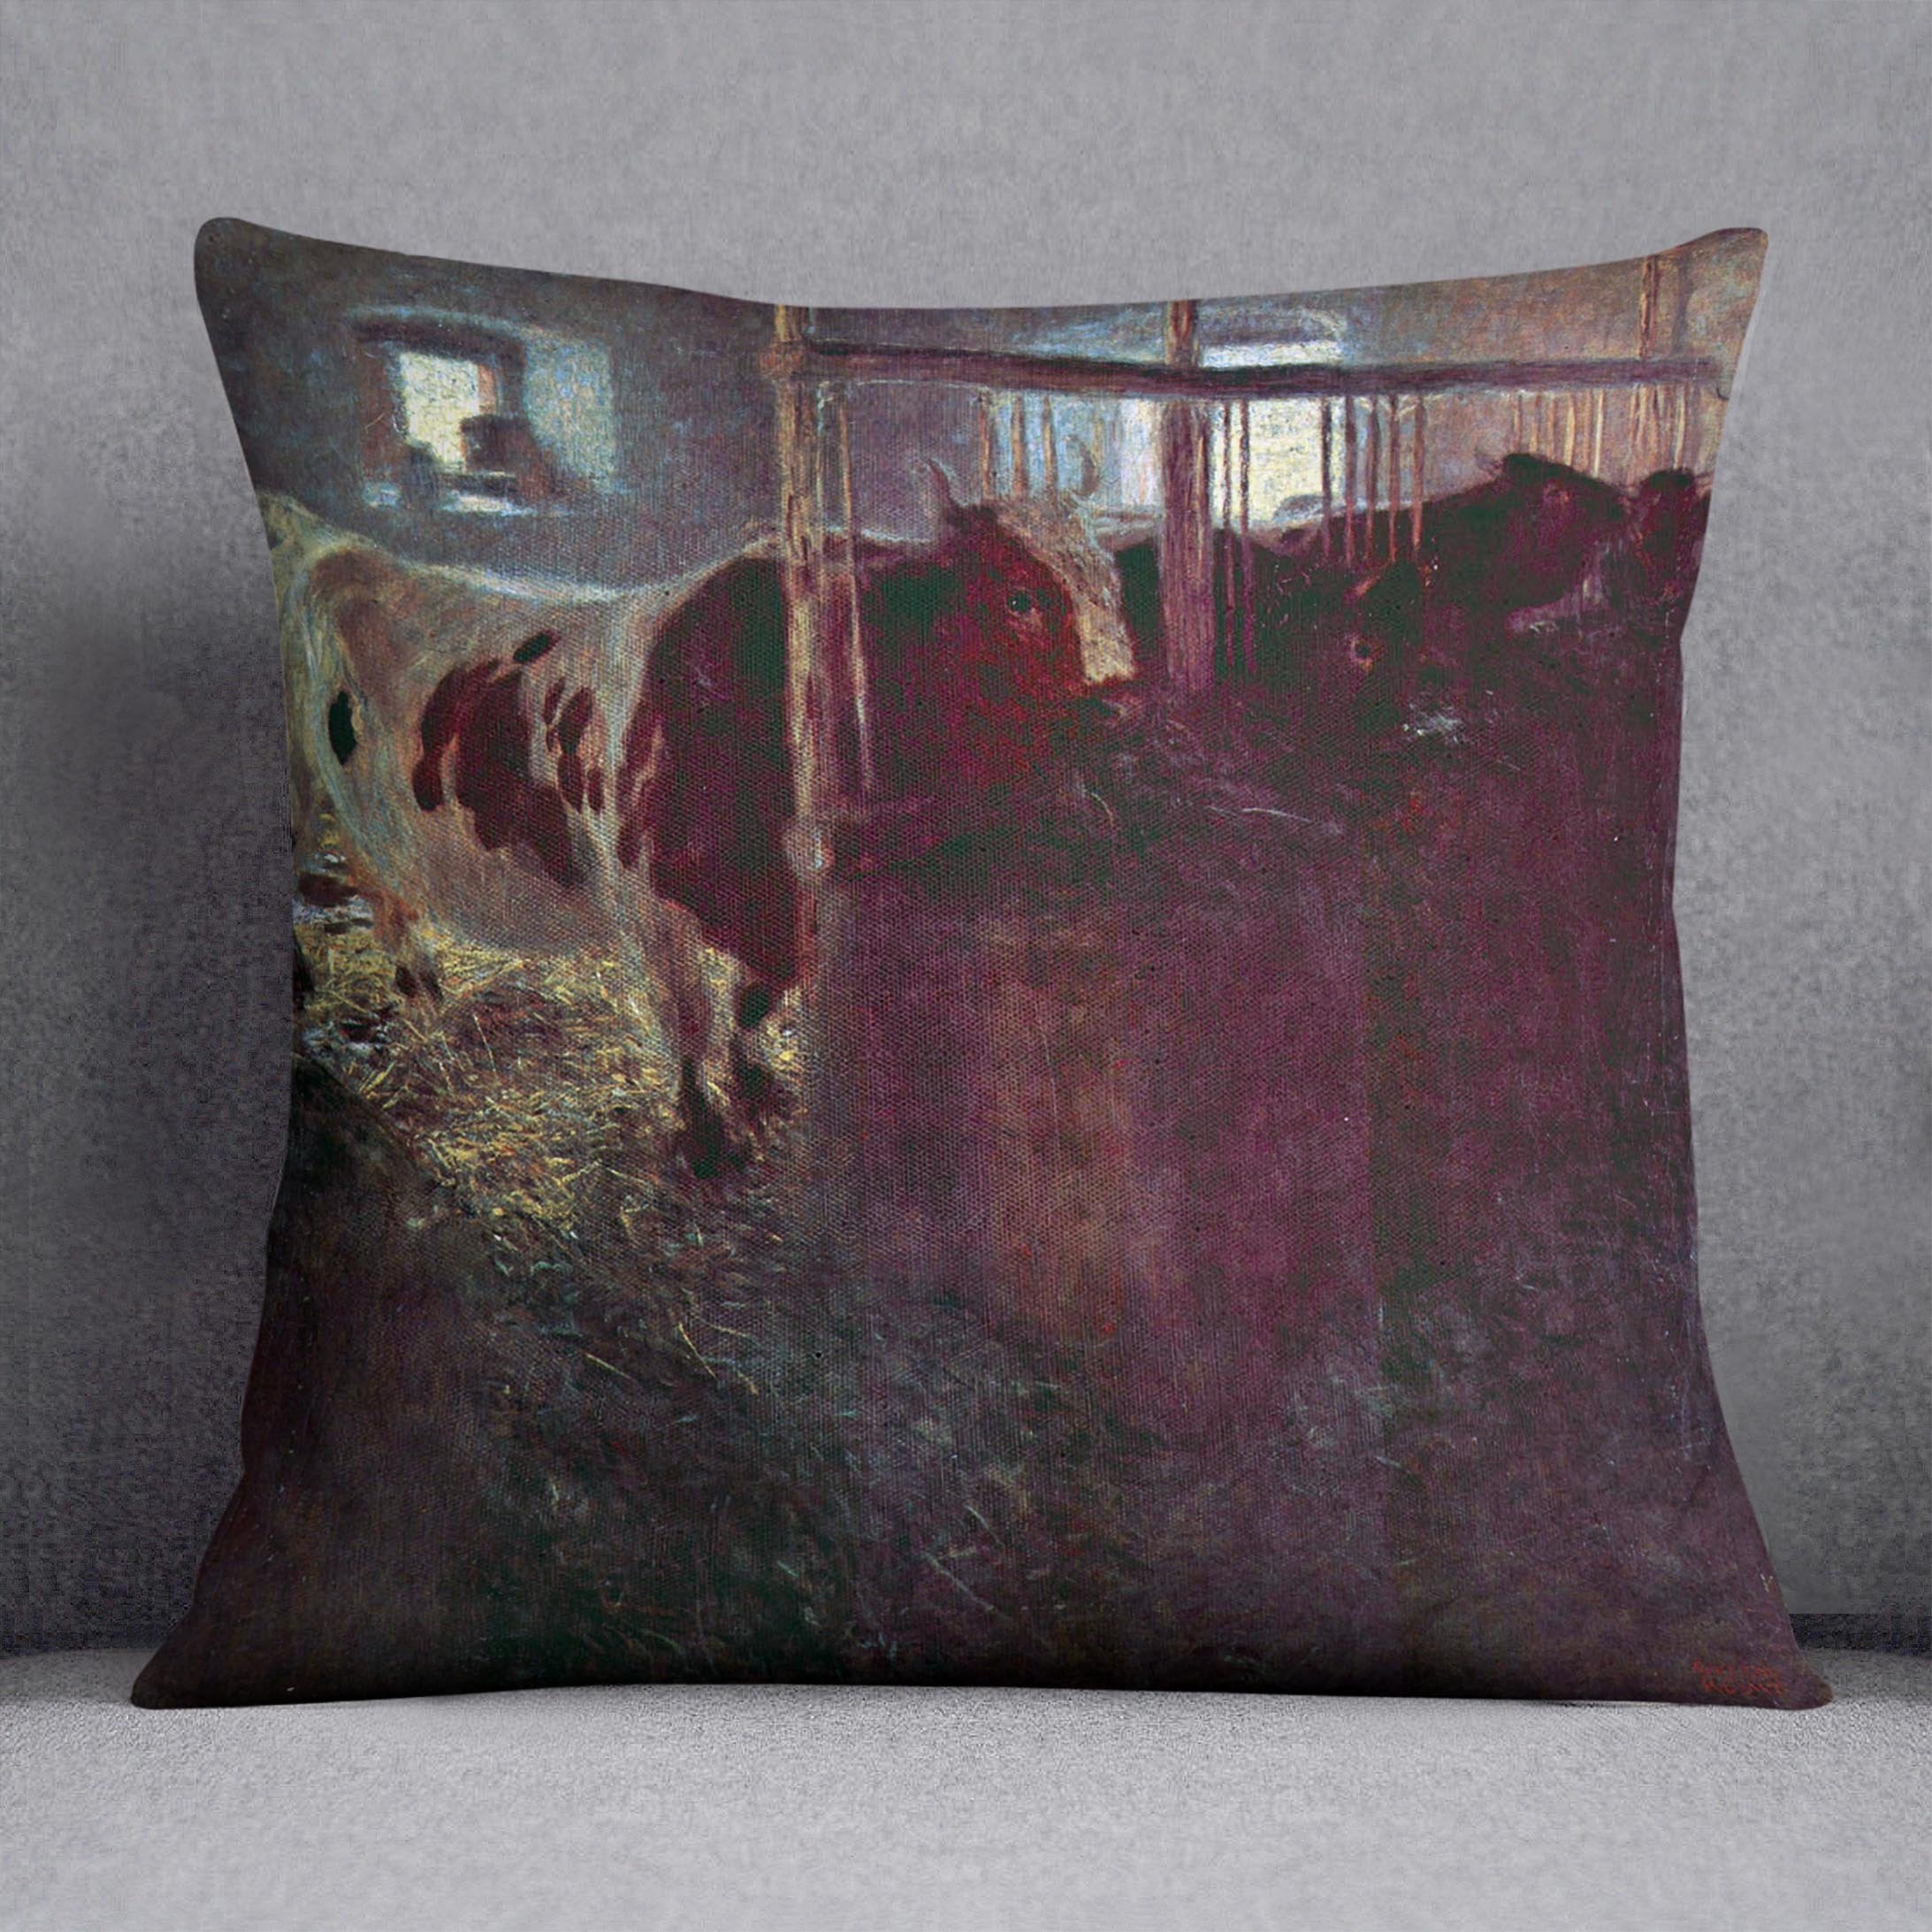 Cows in Stall by Klimt Throw Pillow